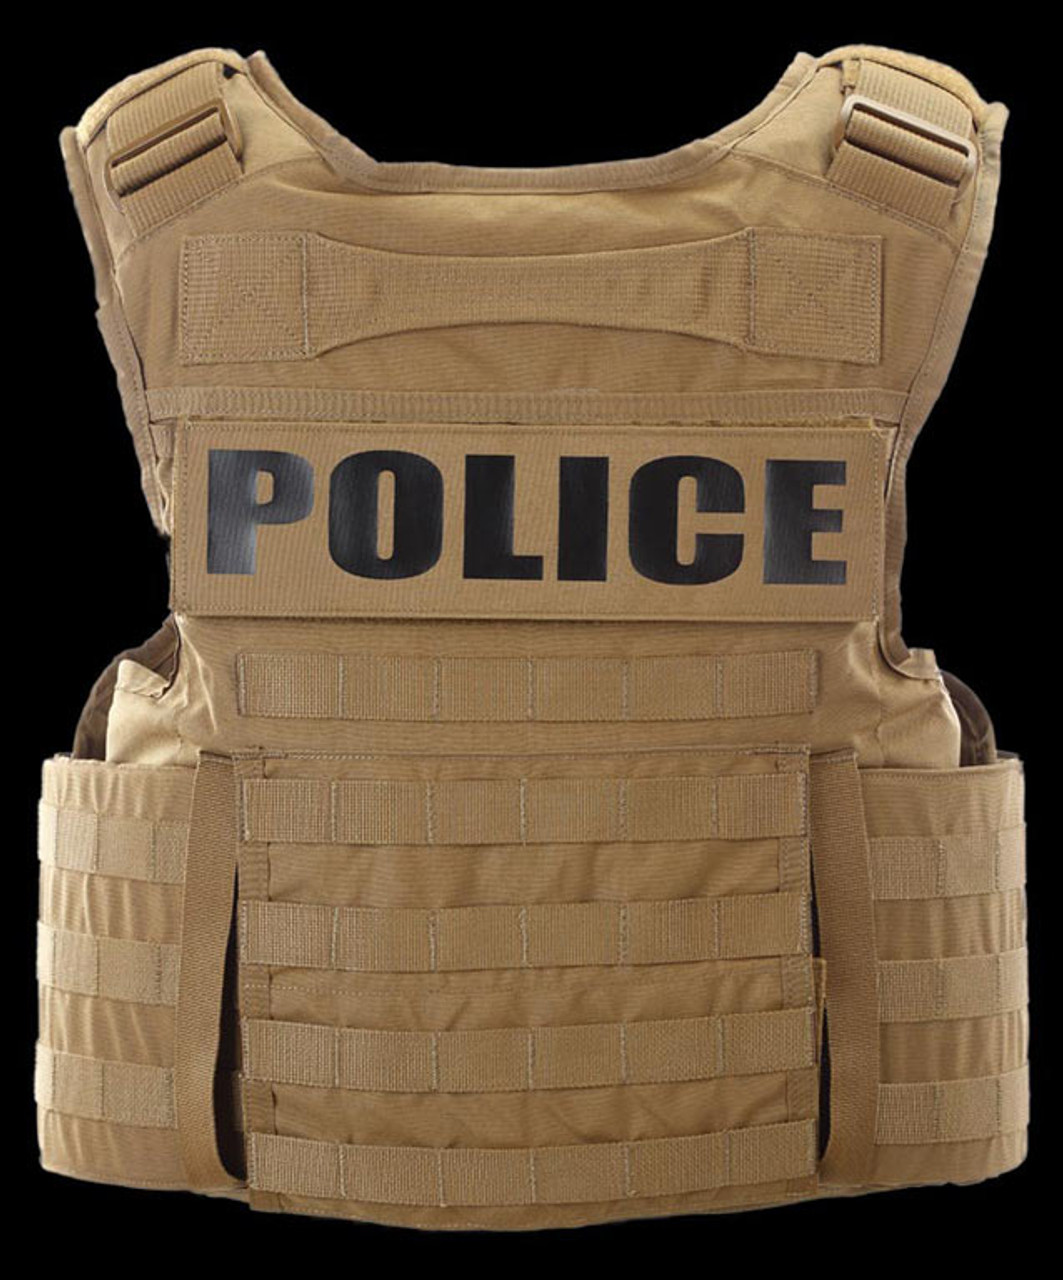 Point Blank FAS-TC Ballistic Body Armor Vest, For Military and Police, Available with NIJ .06 Level IIA, II and IIIA Ballistic Systems